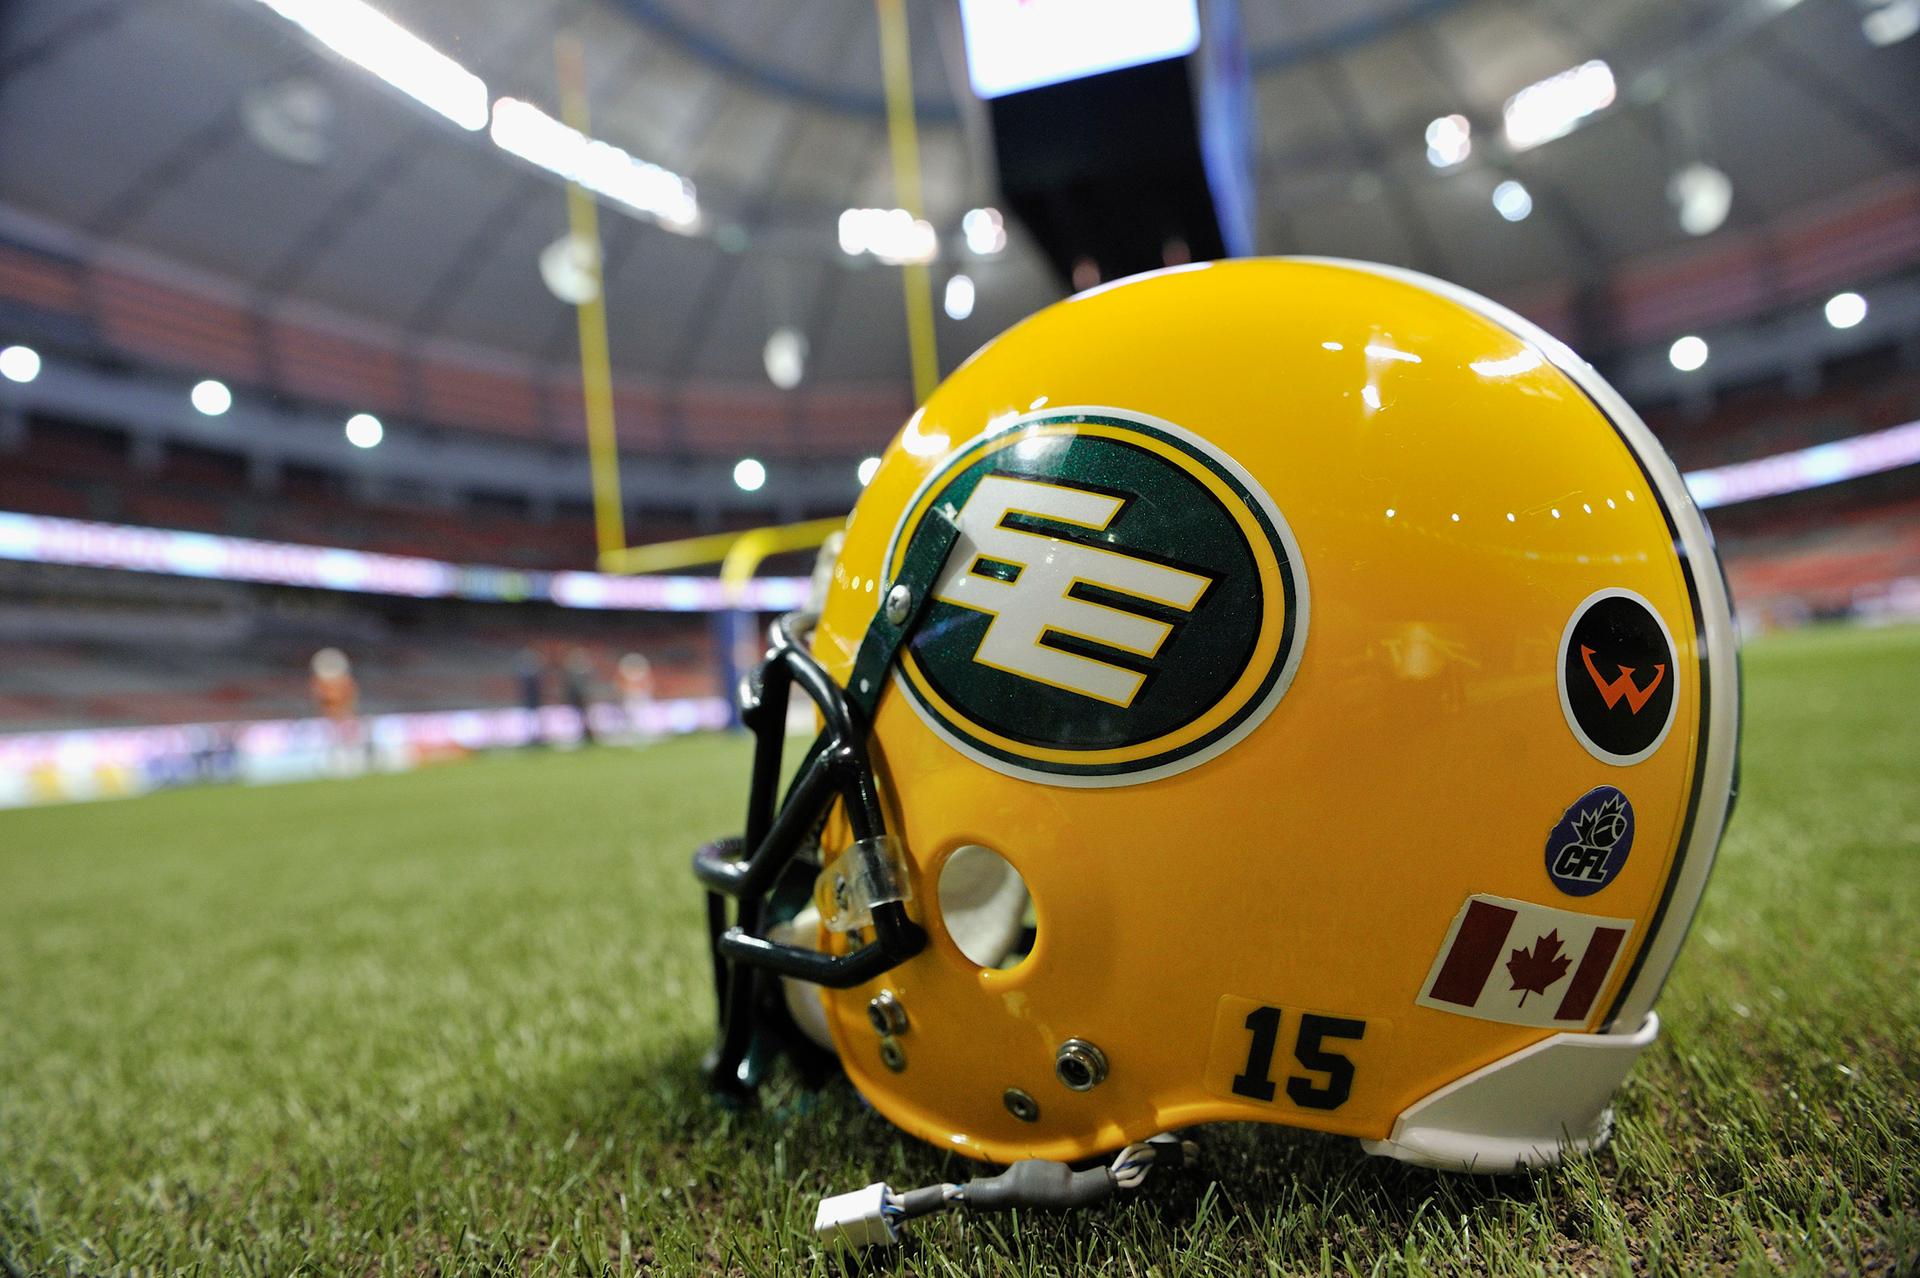 The Edmonton Eskimos of the Canadian Football League are in the spotlight for their nickname, which critics liken to the Washington Redskins.